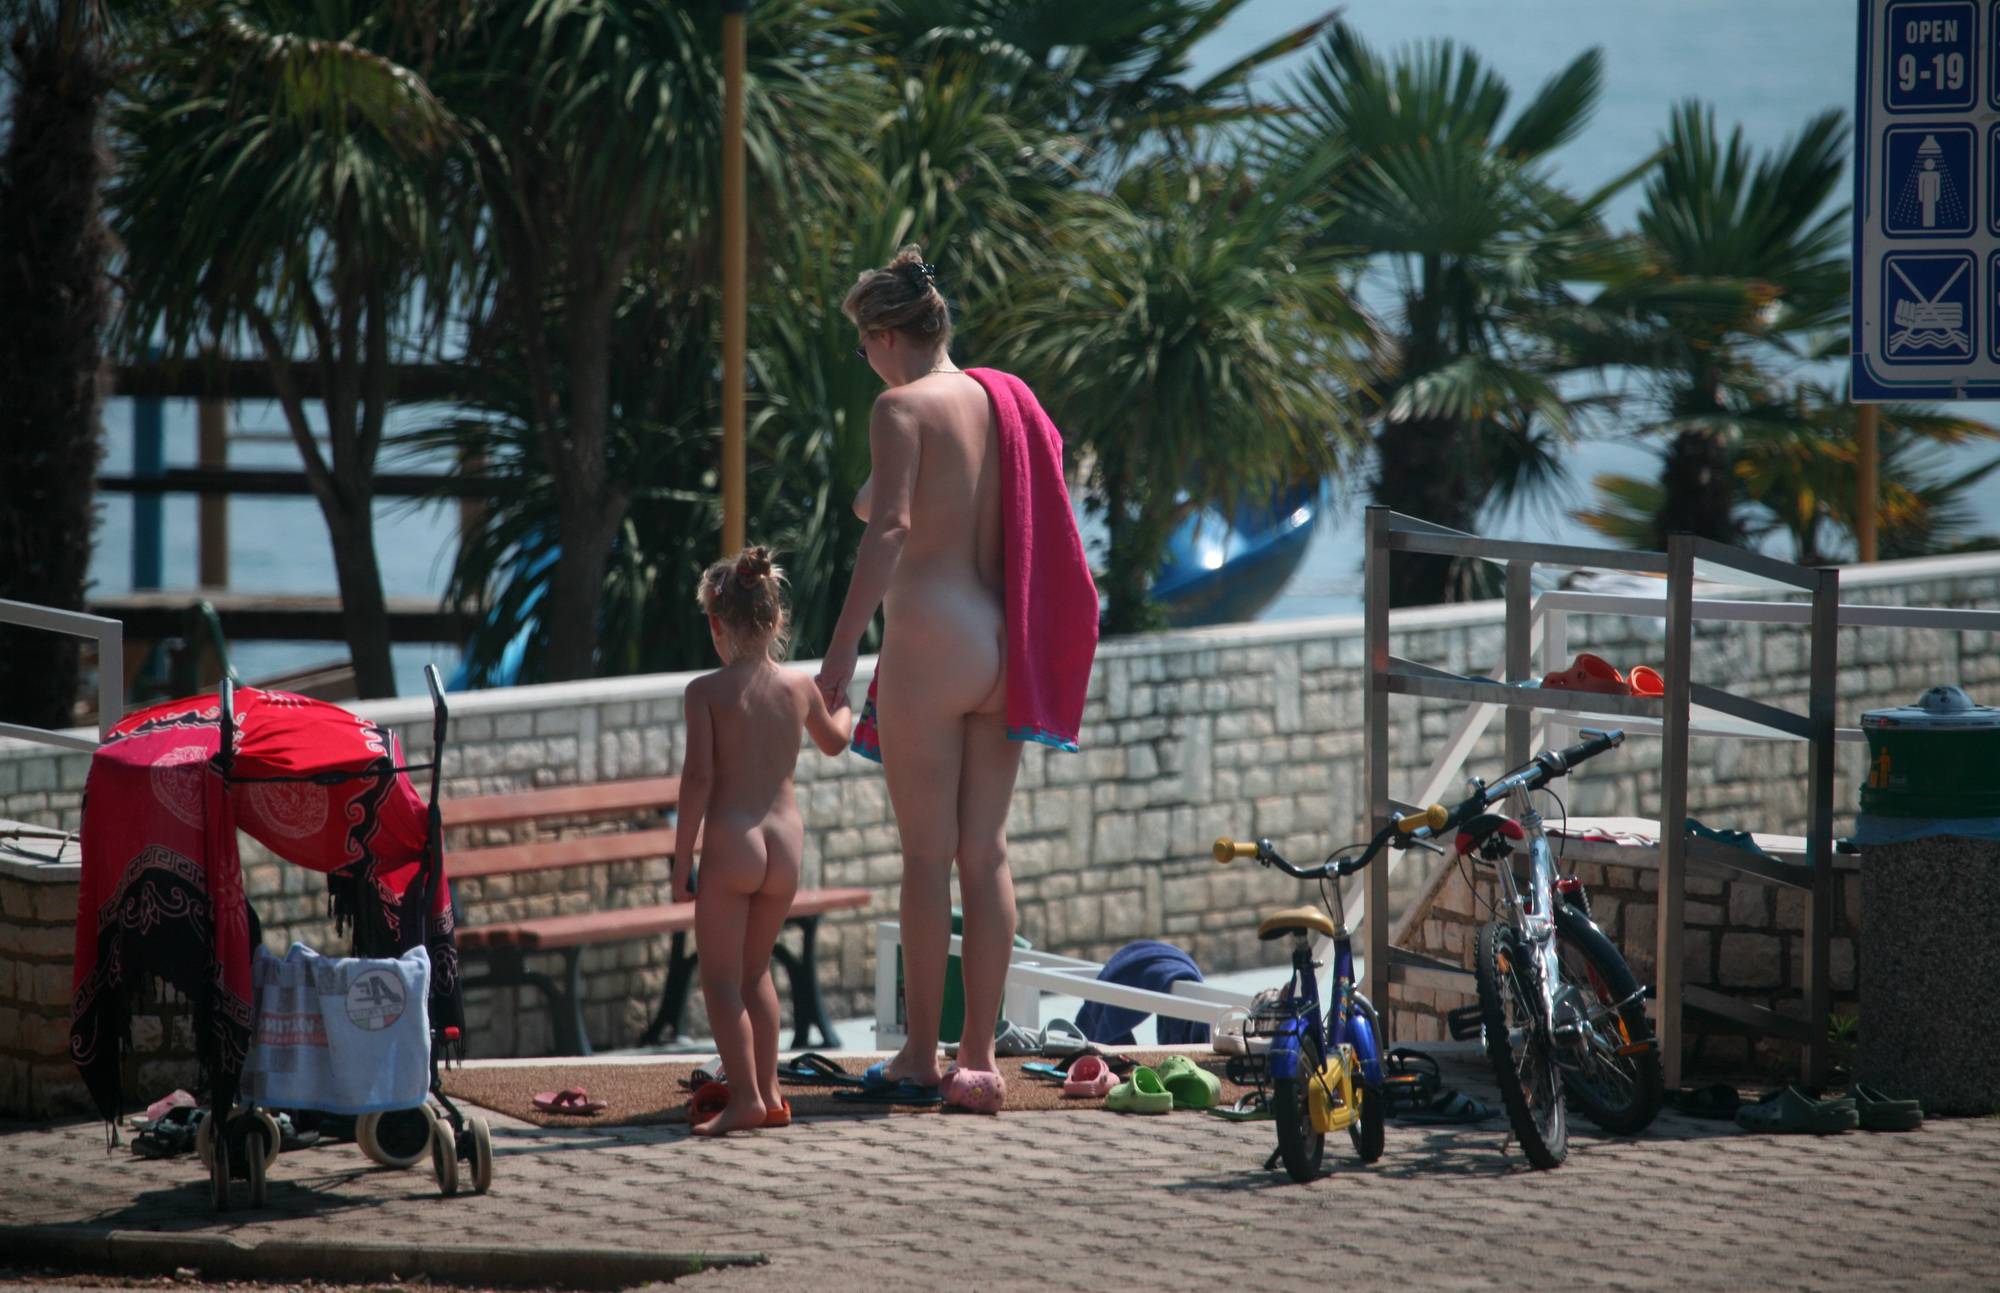 Naturist Mothers and Sons - 2